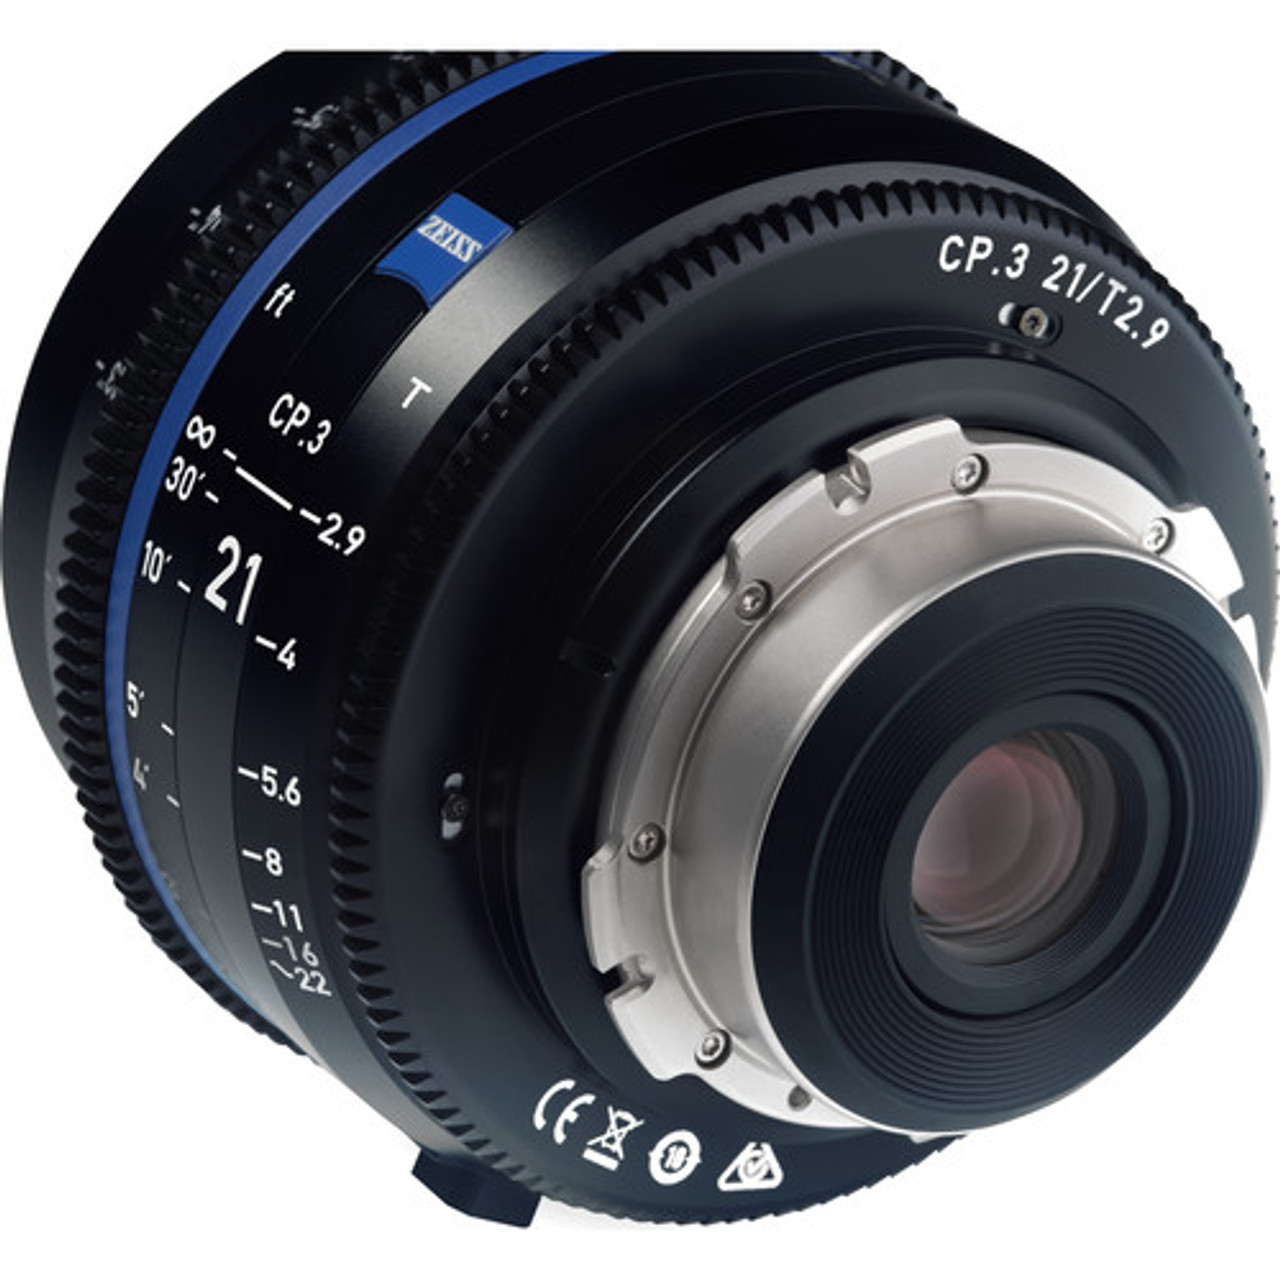 Zeiss 2183-066 CP.3 21mm T2.9 Compact Prime Lens (PL Mount, Feet)